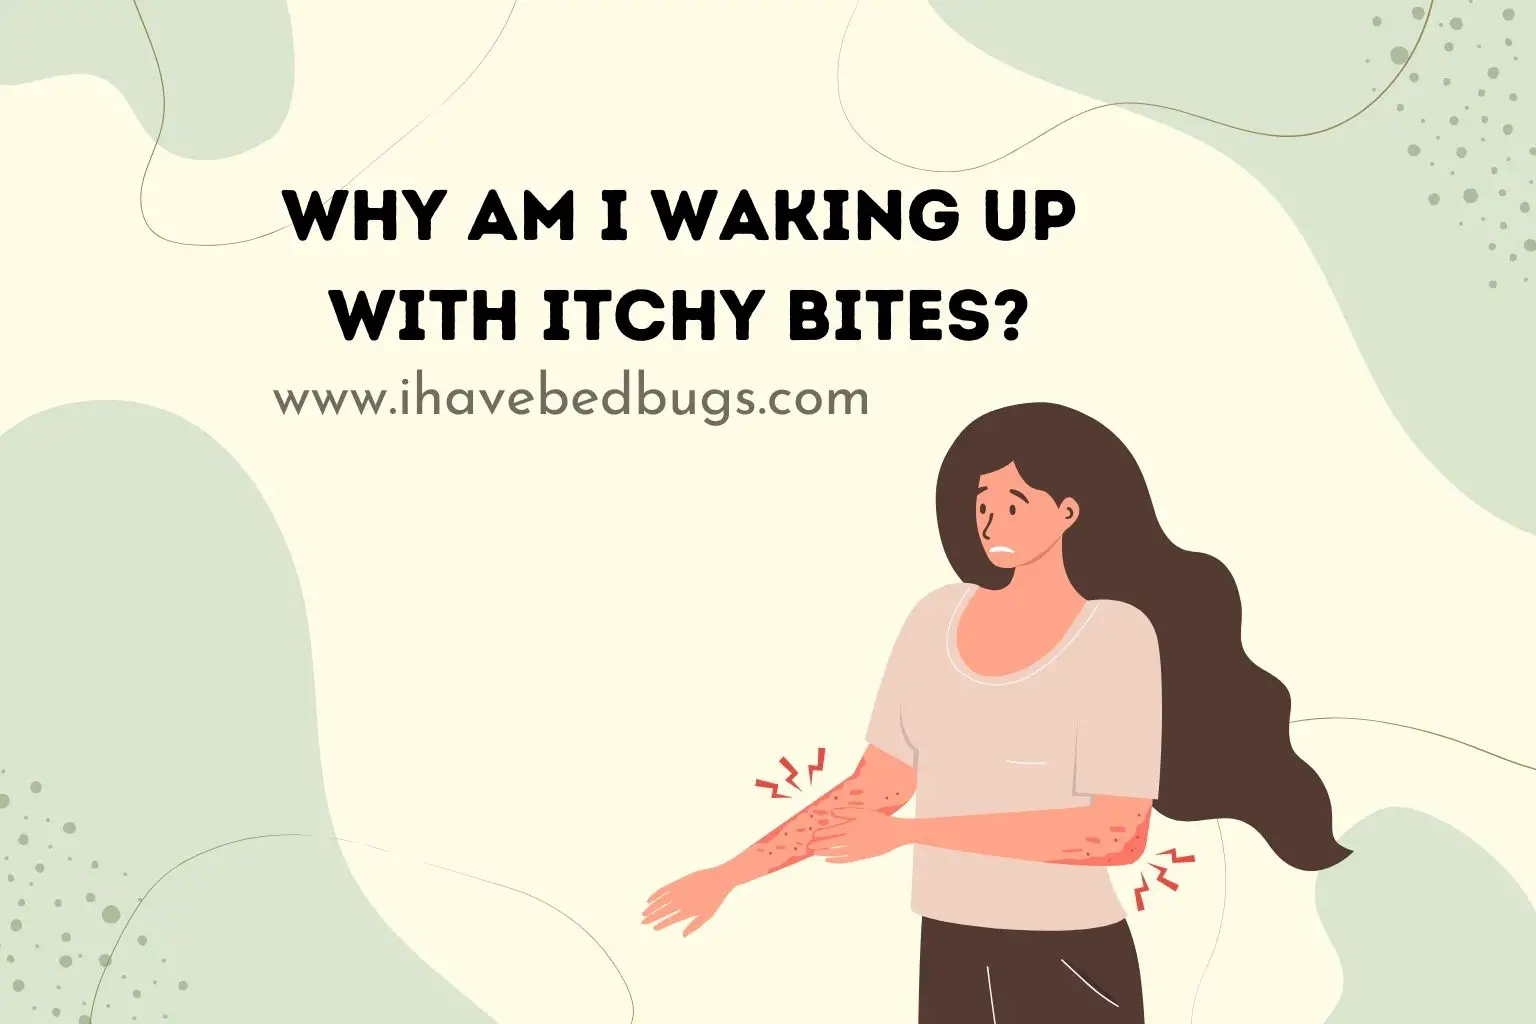 Why am I waking up with itchy bites